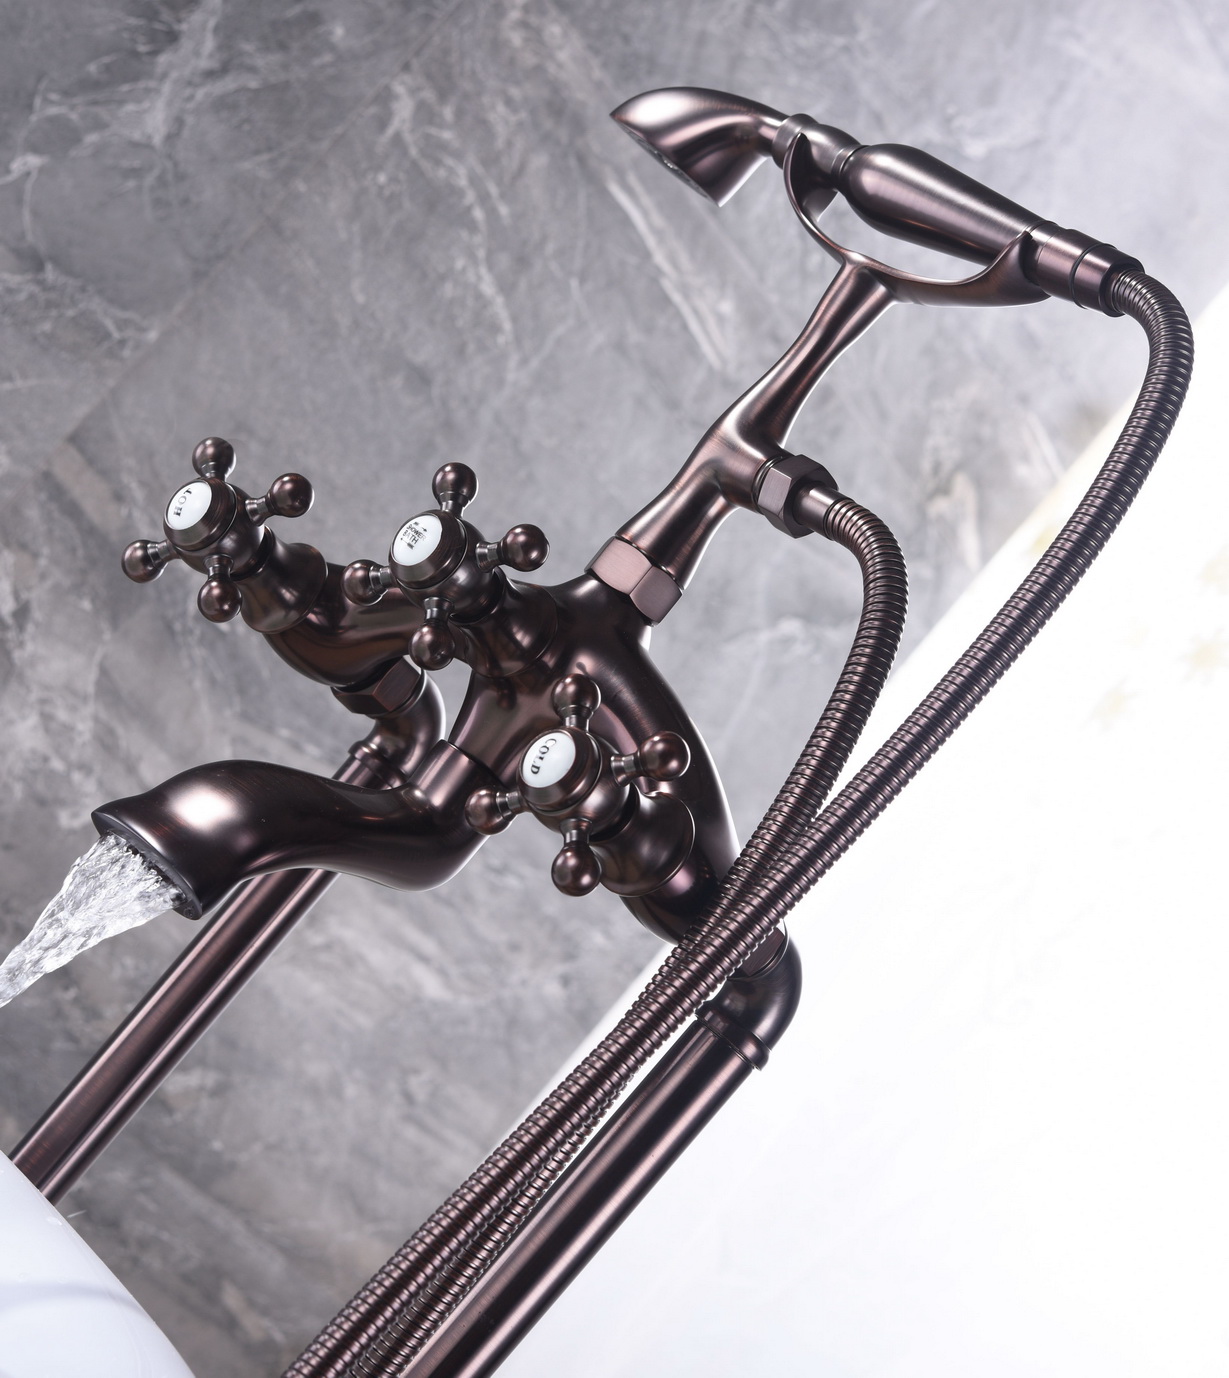 Antique Color Design Copper Hot Tap Free Standing Mixer Faucet for Claw Foot Bathtub